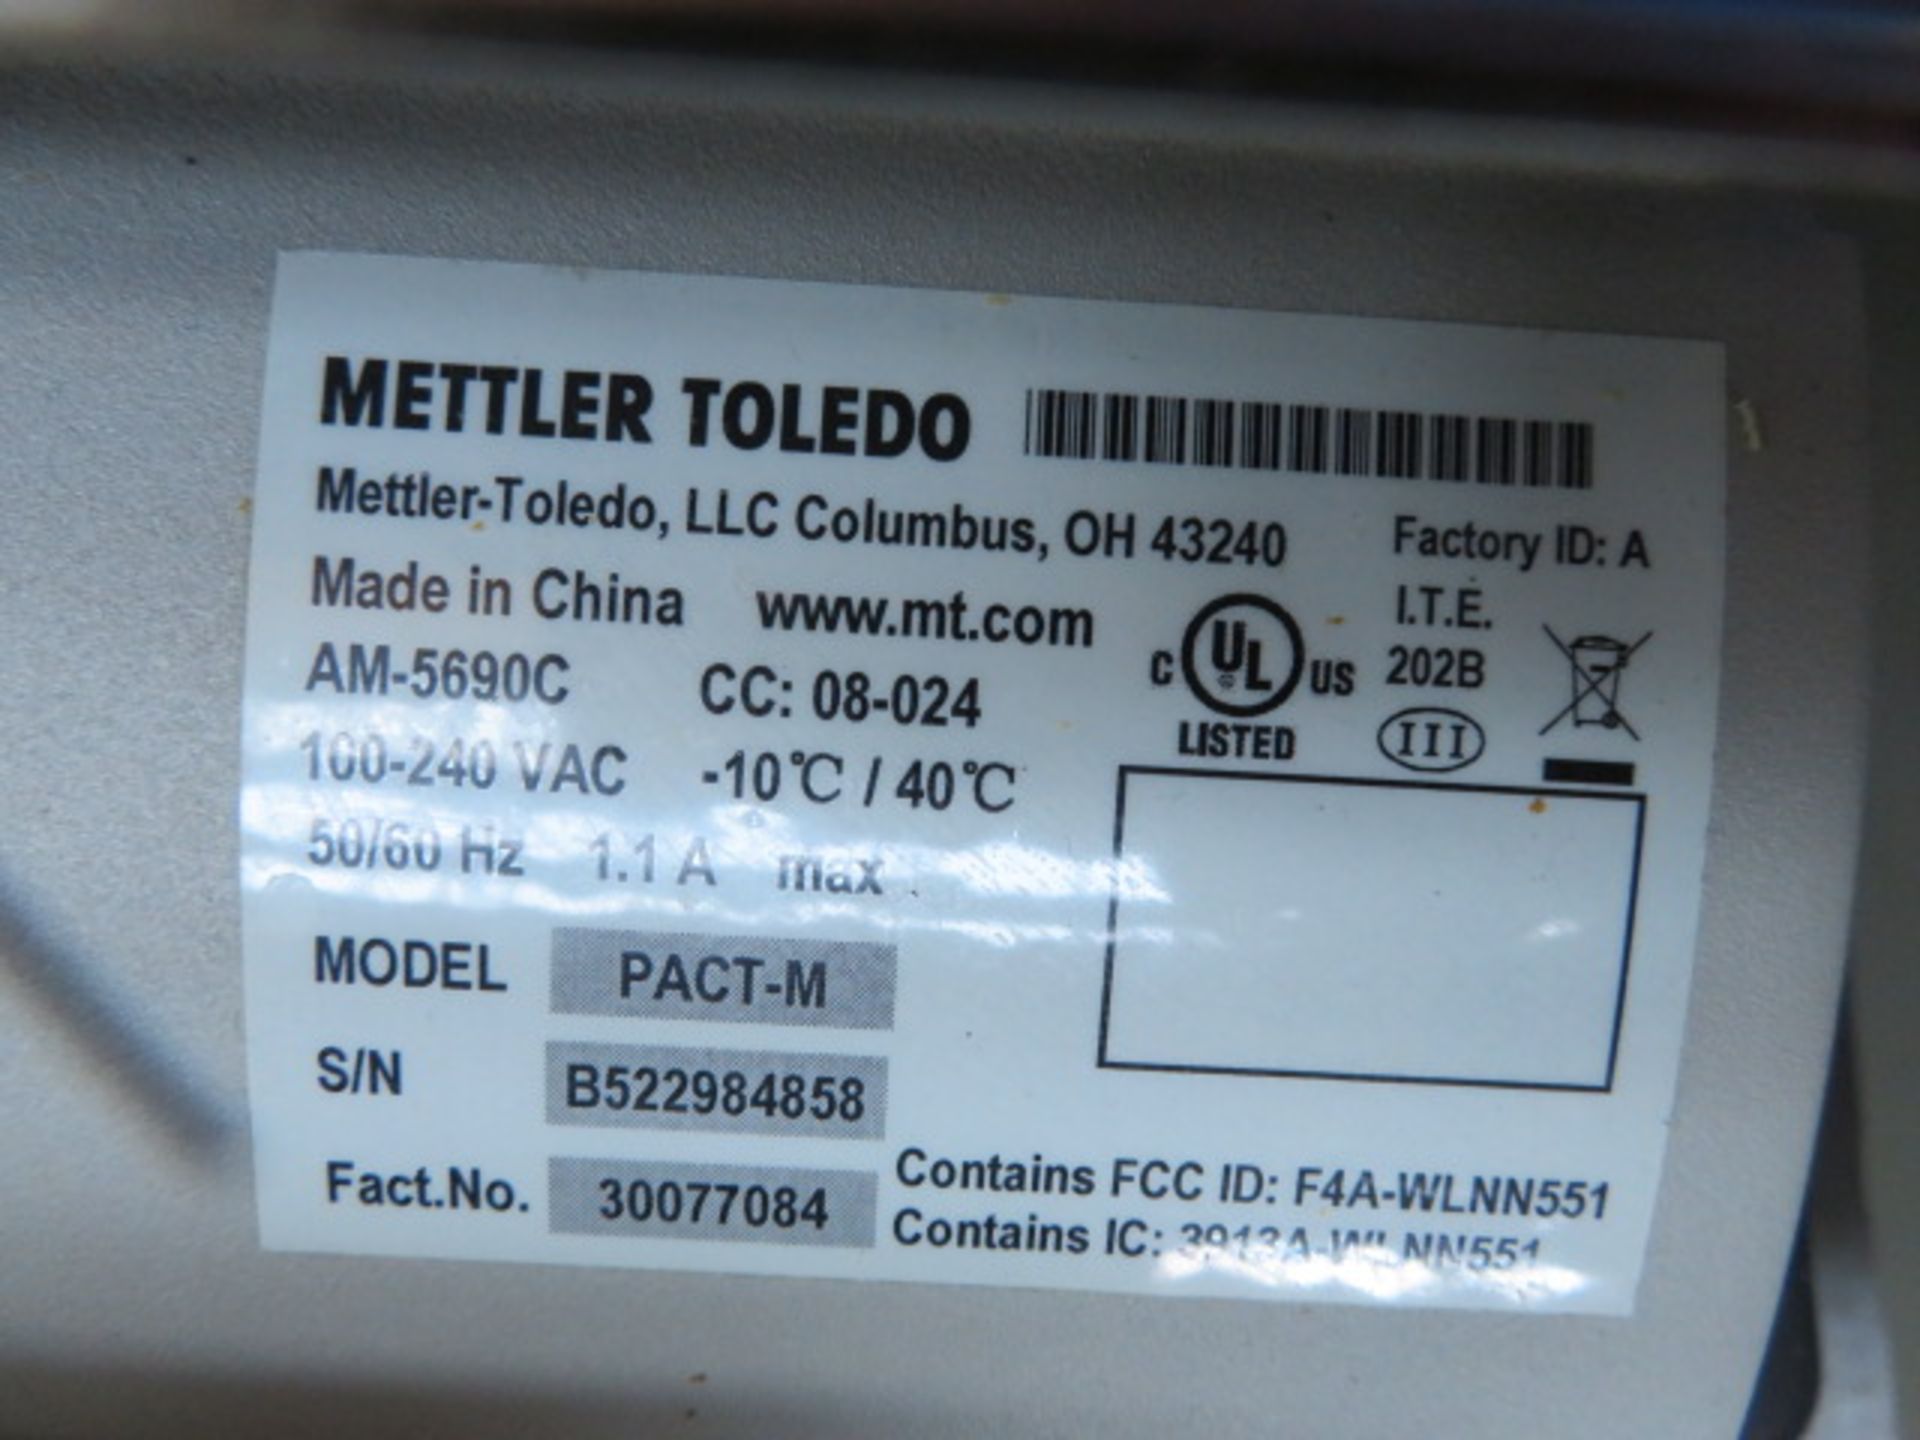 METTLER TOLEDO 8461 SMART TOUCH SCALE (Located - Phila.,PA) - Image 2 of 2